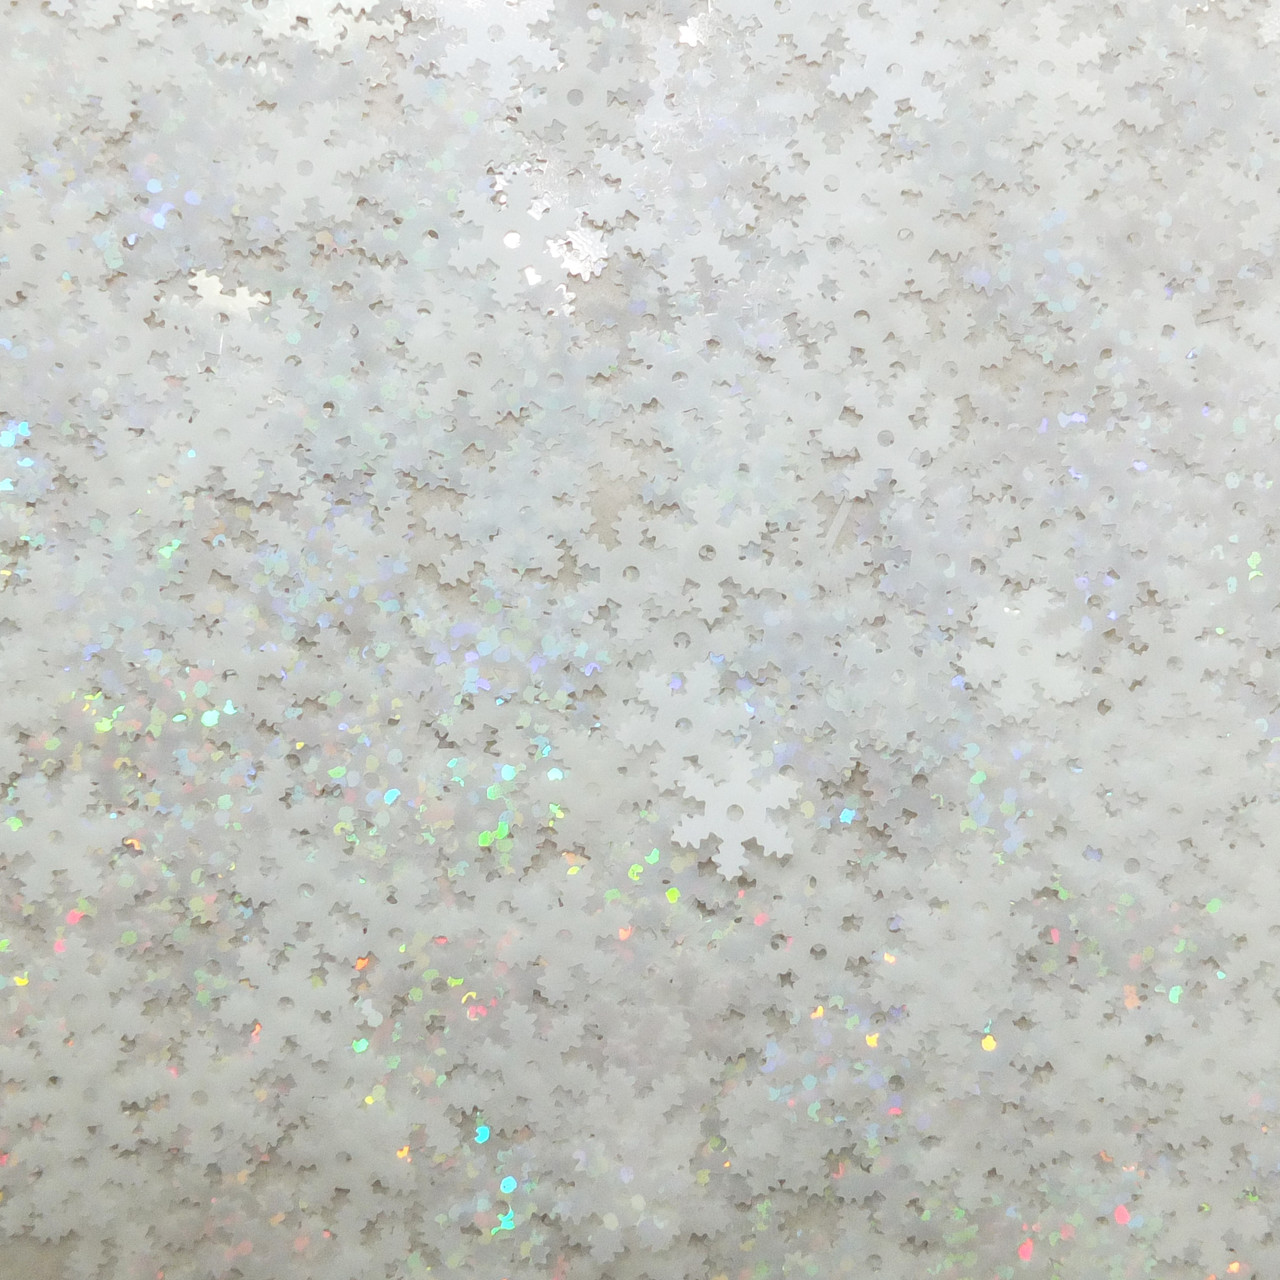 Snowflake Sequin Silver Hologram Glitter 10mm Made in USA